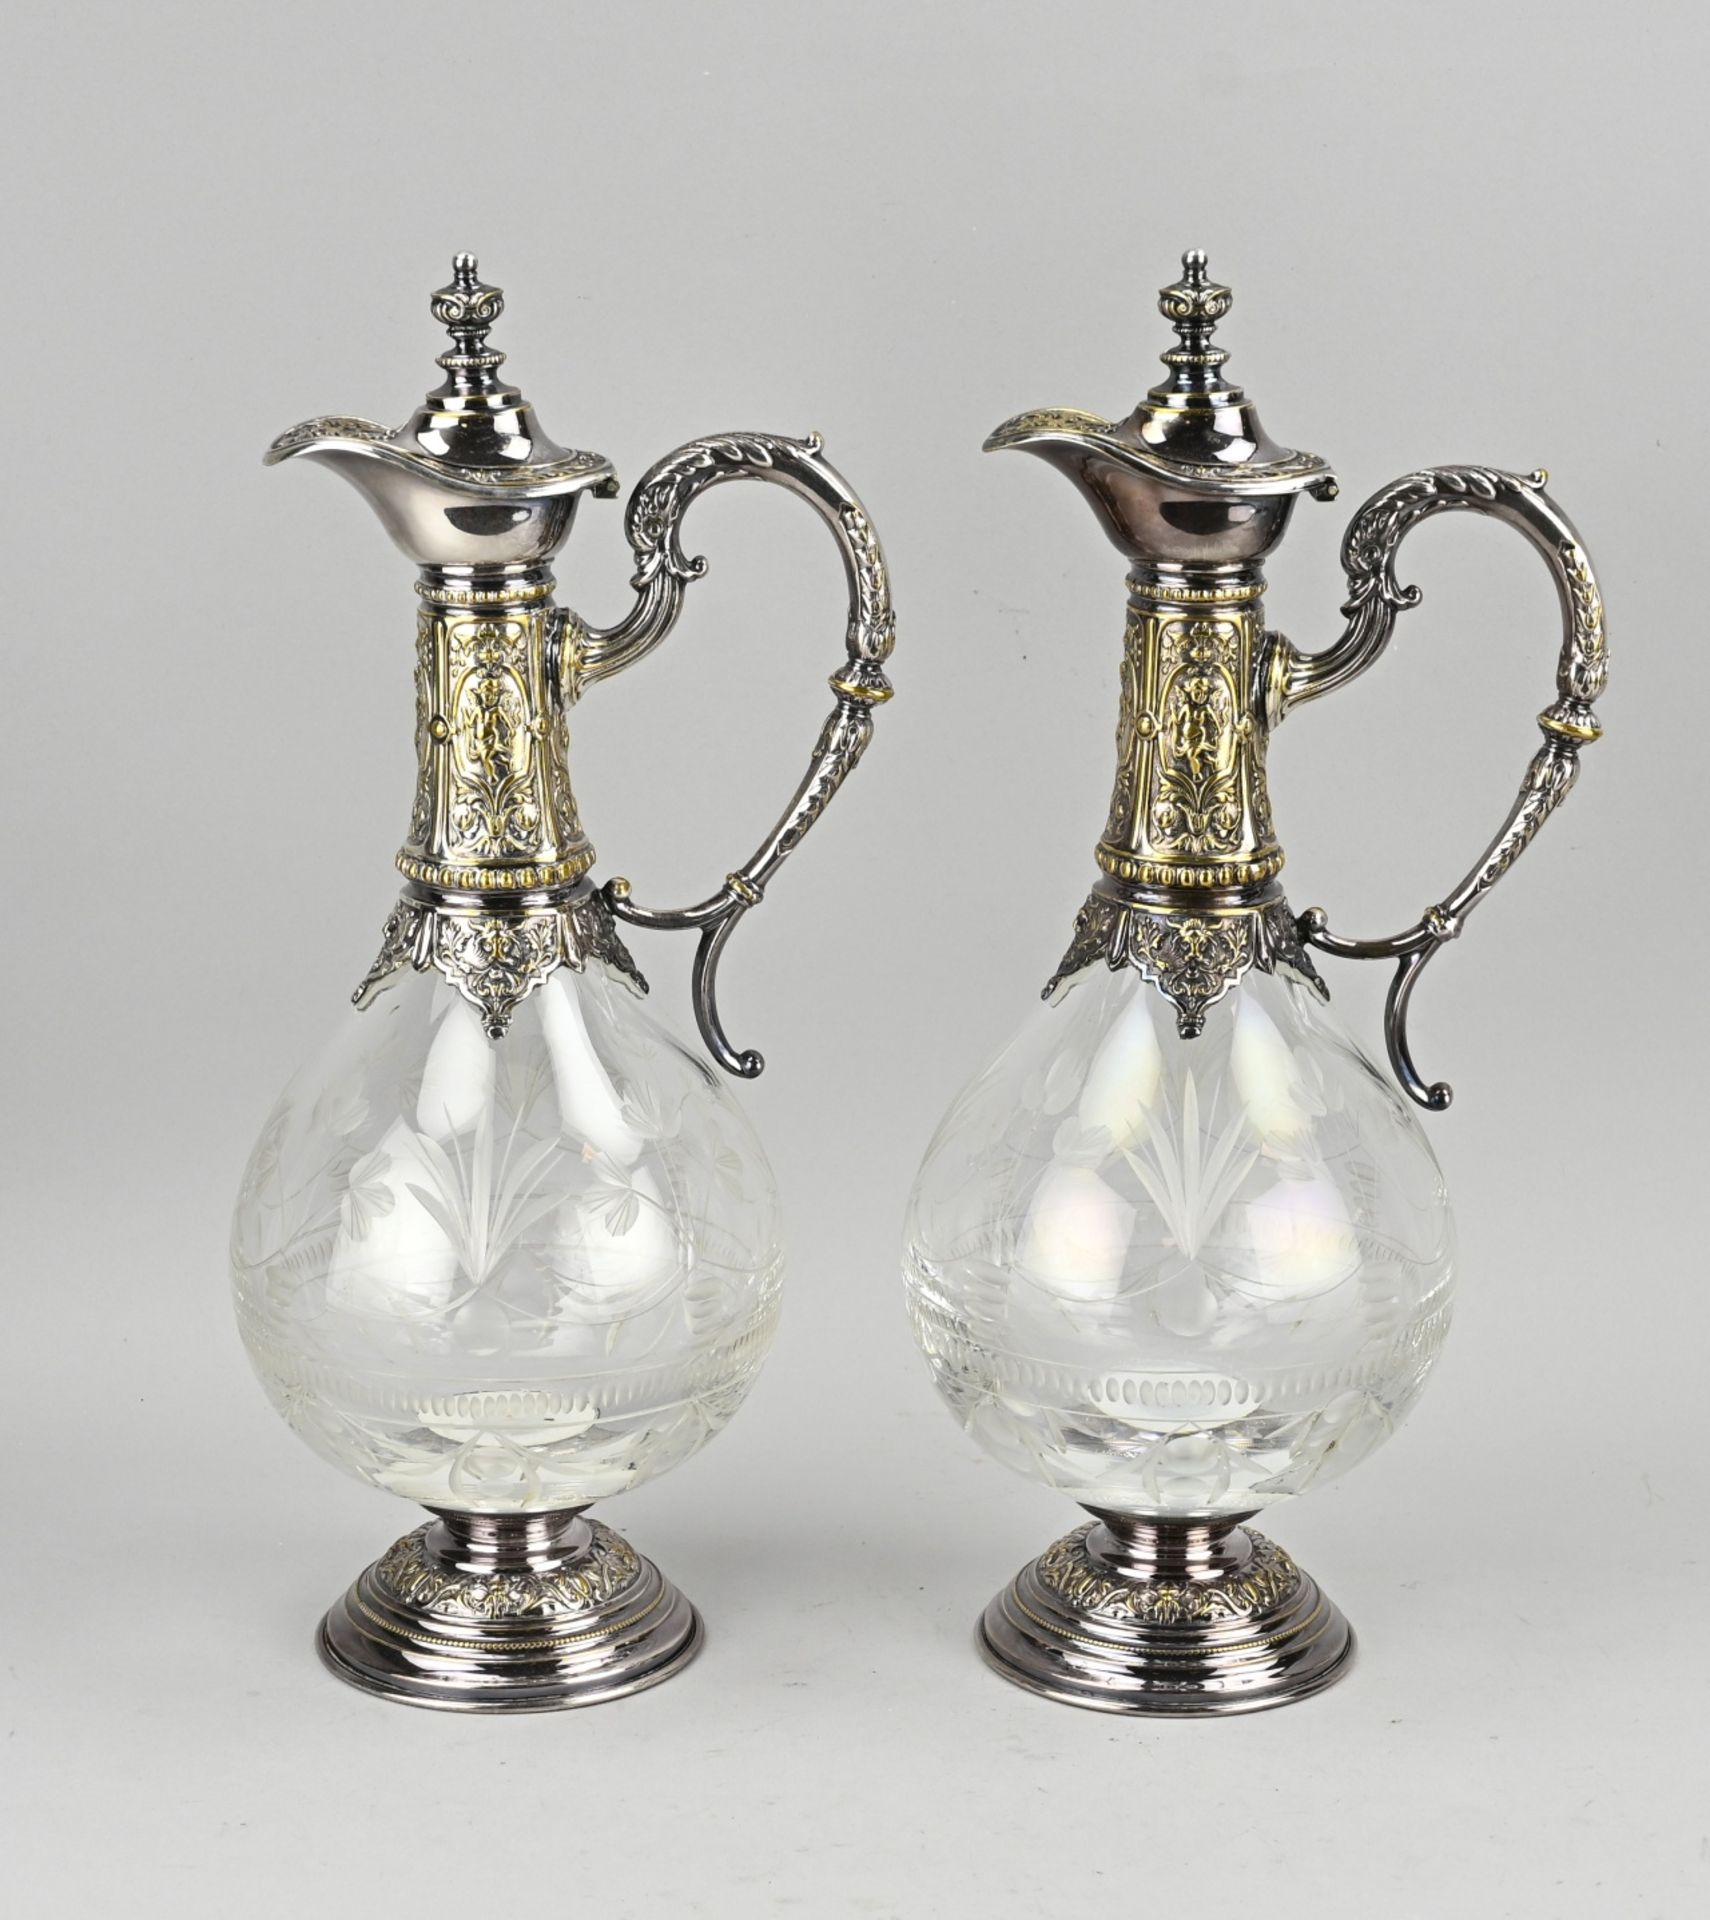 2 Plated decanters